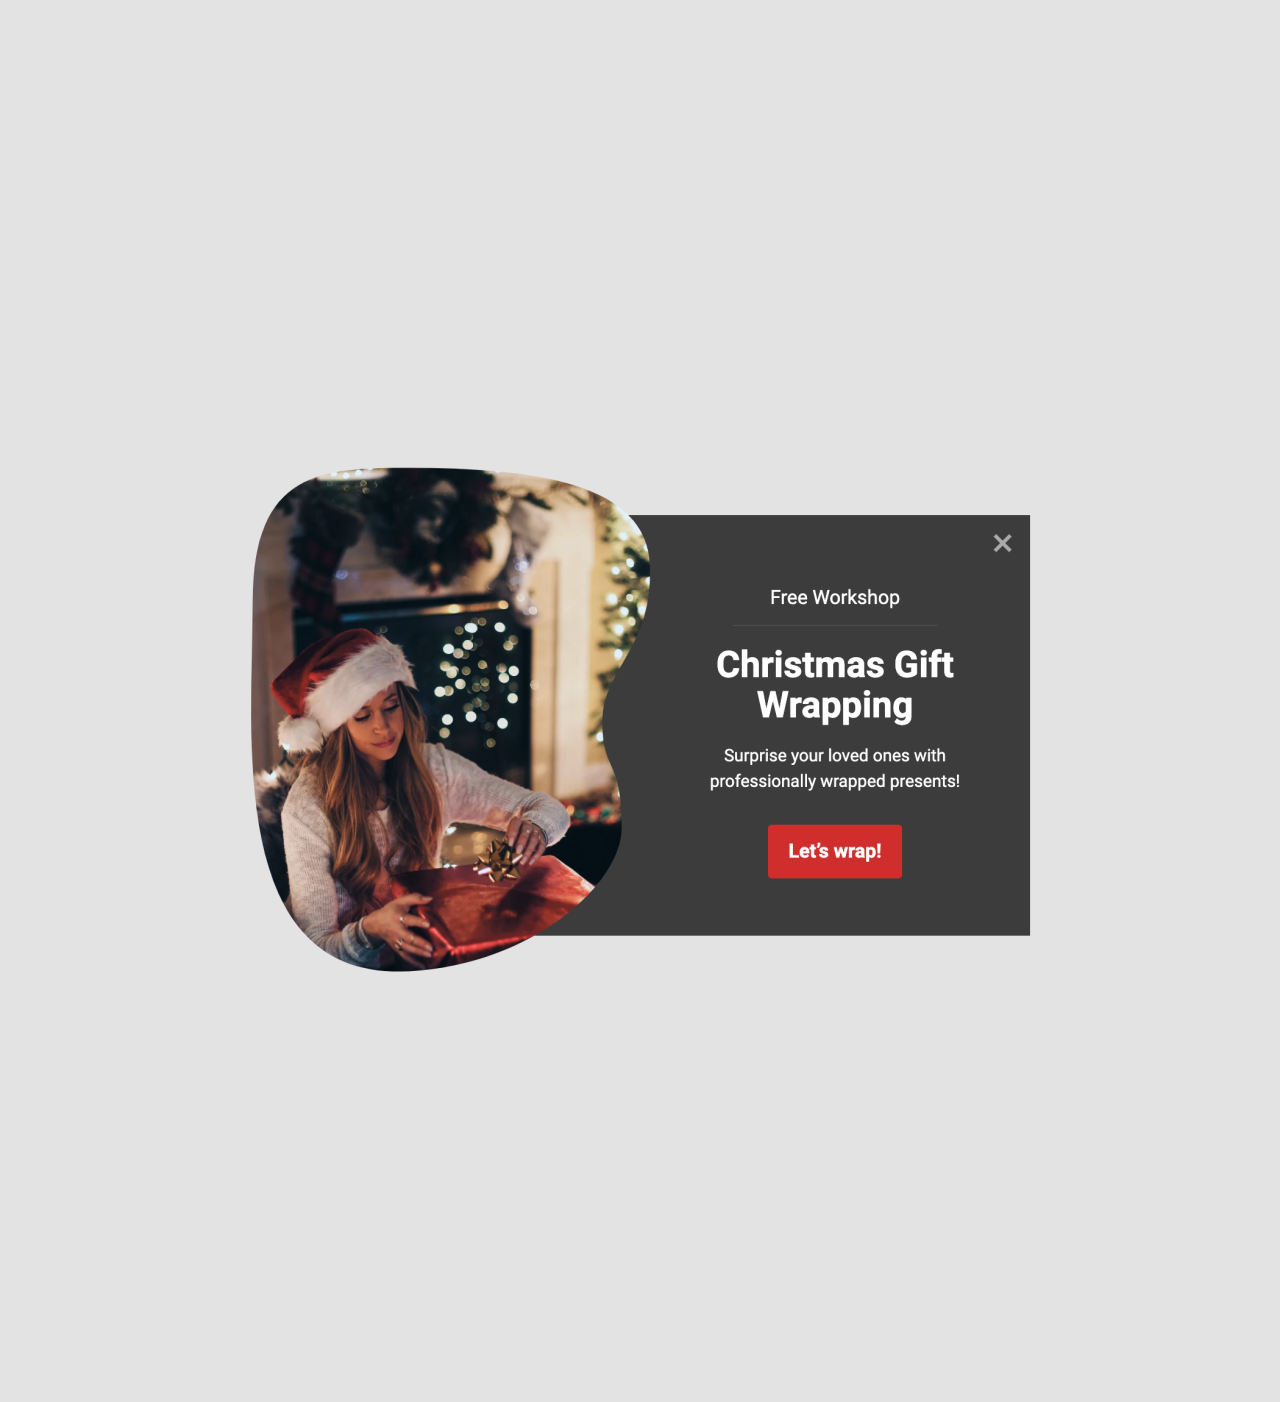 Holiday webinar invite template - Made by MailerLite